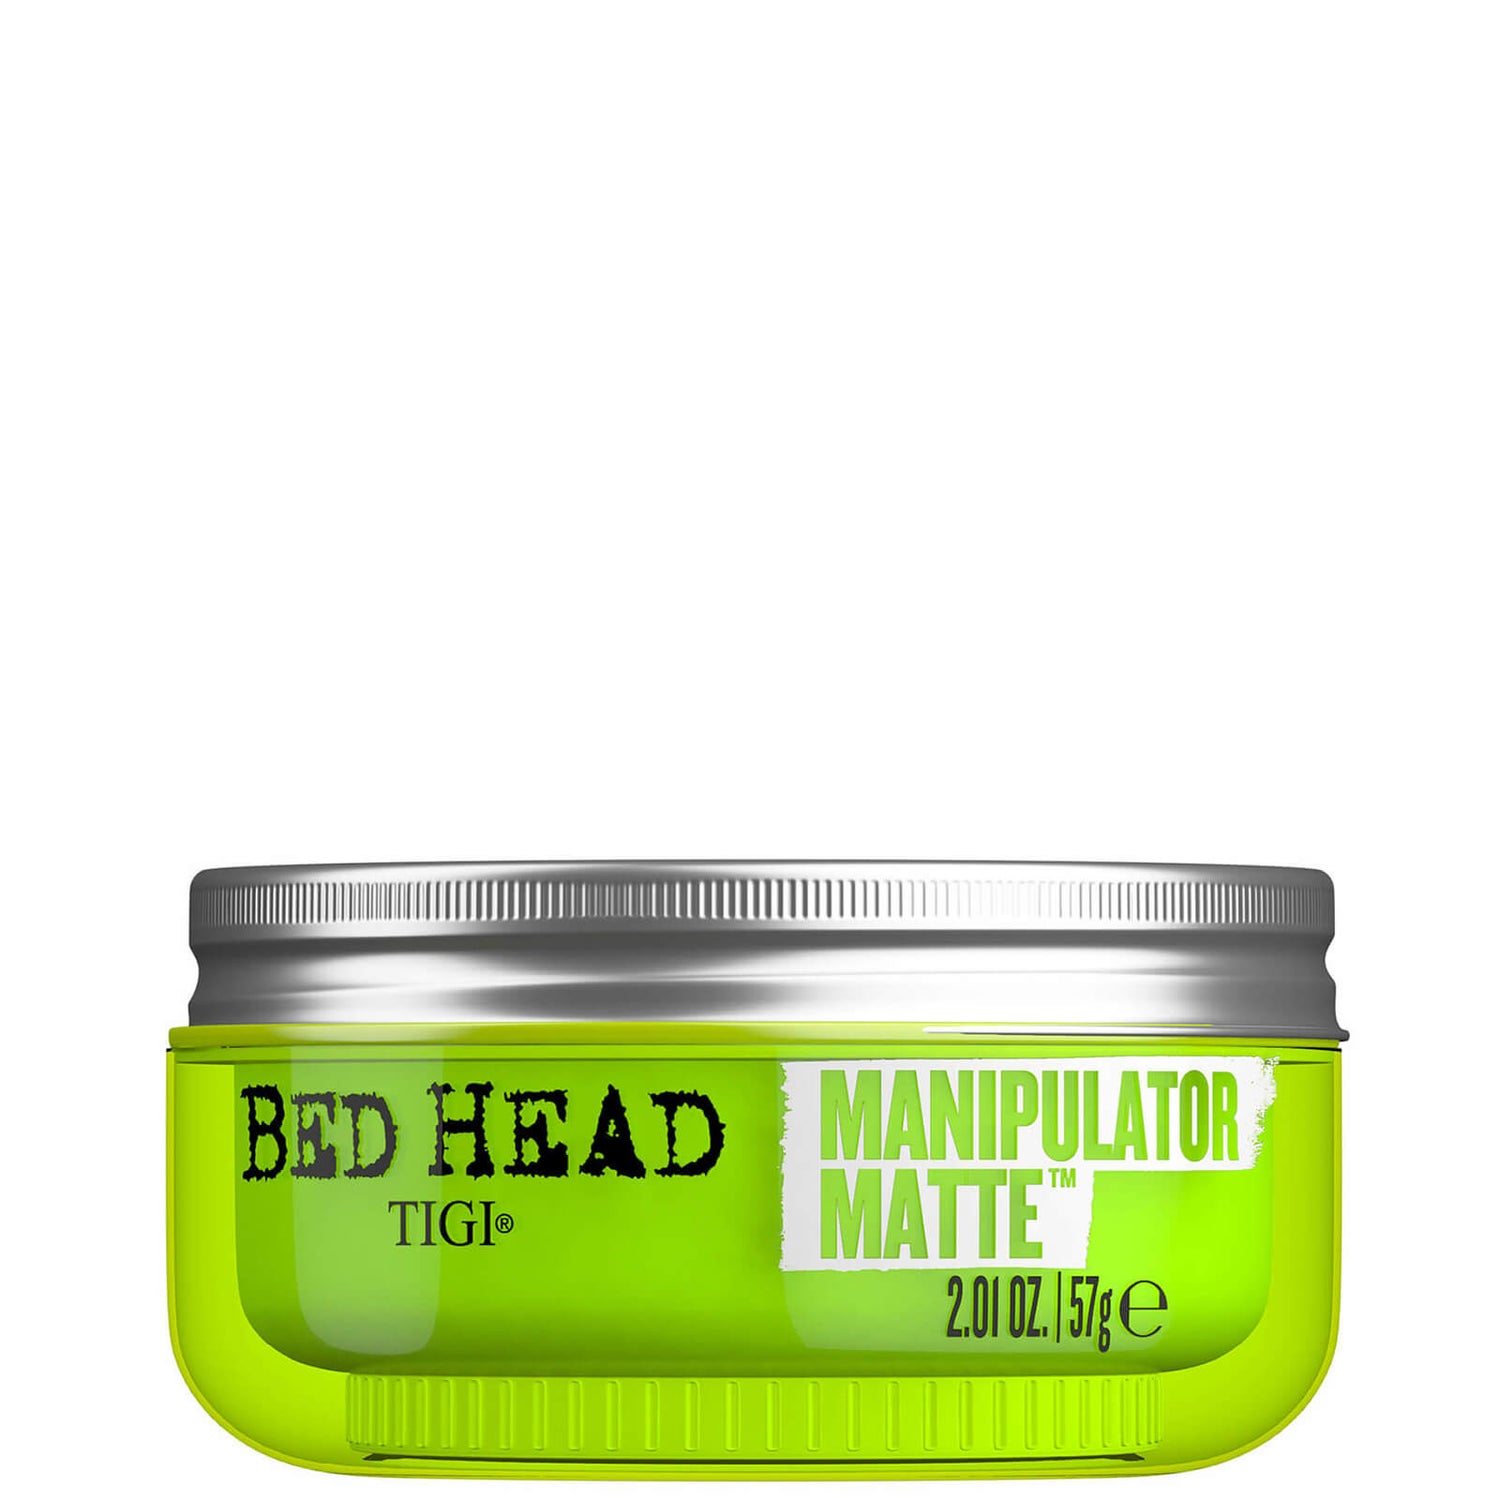 TIGI Bed Head Manipulator Matte Hair Wax Paste with Strong Hold 57g - FREE  Delivery